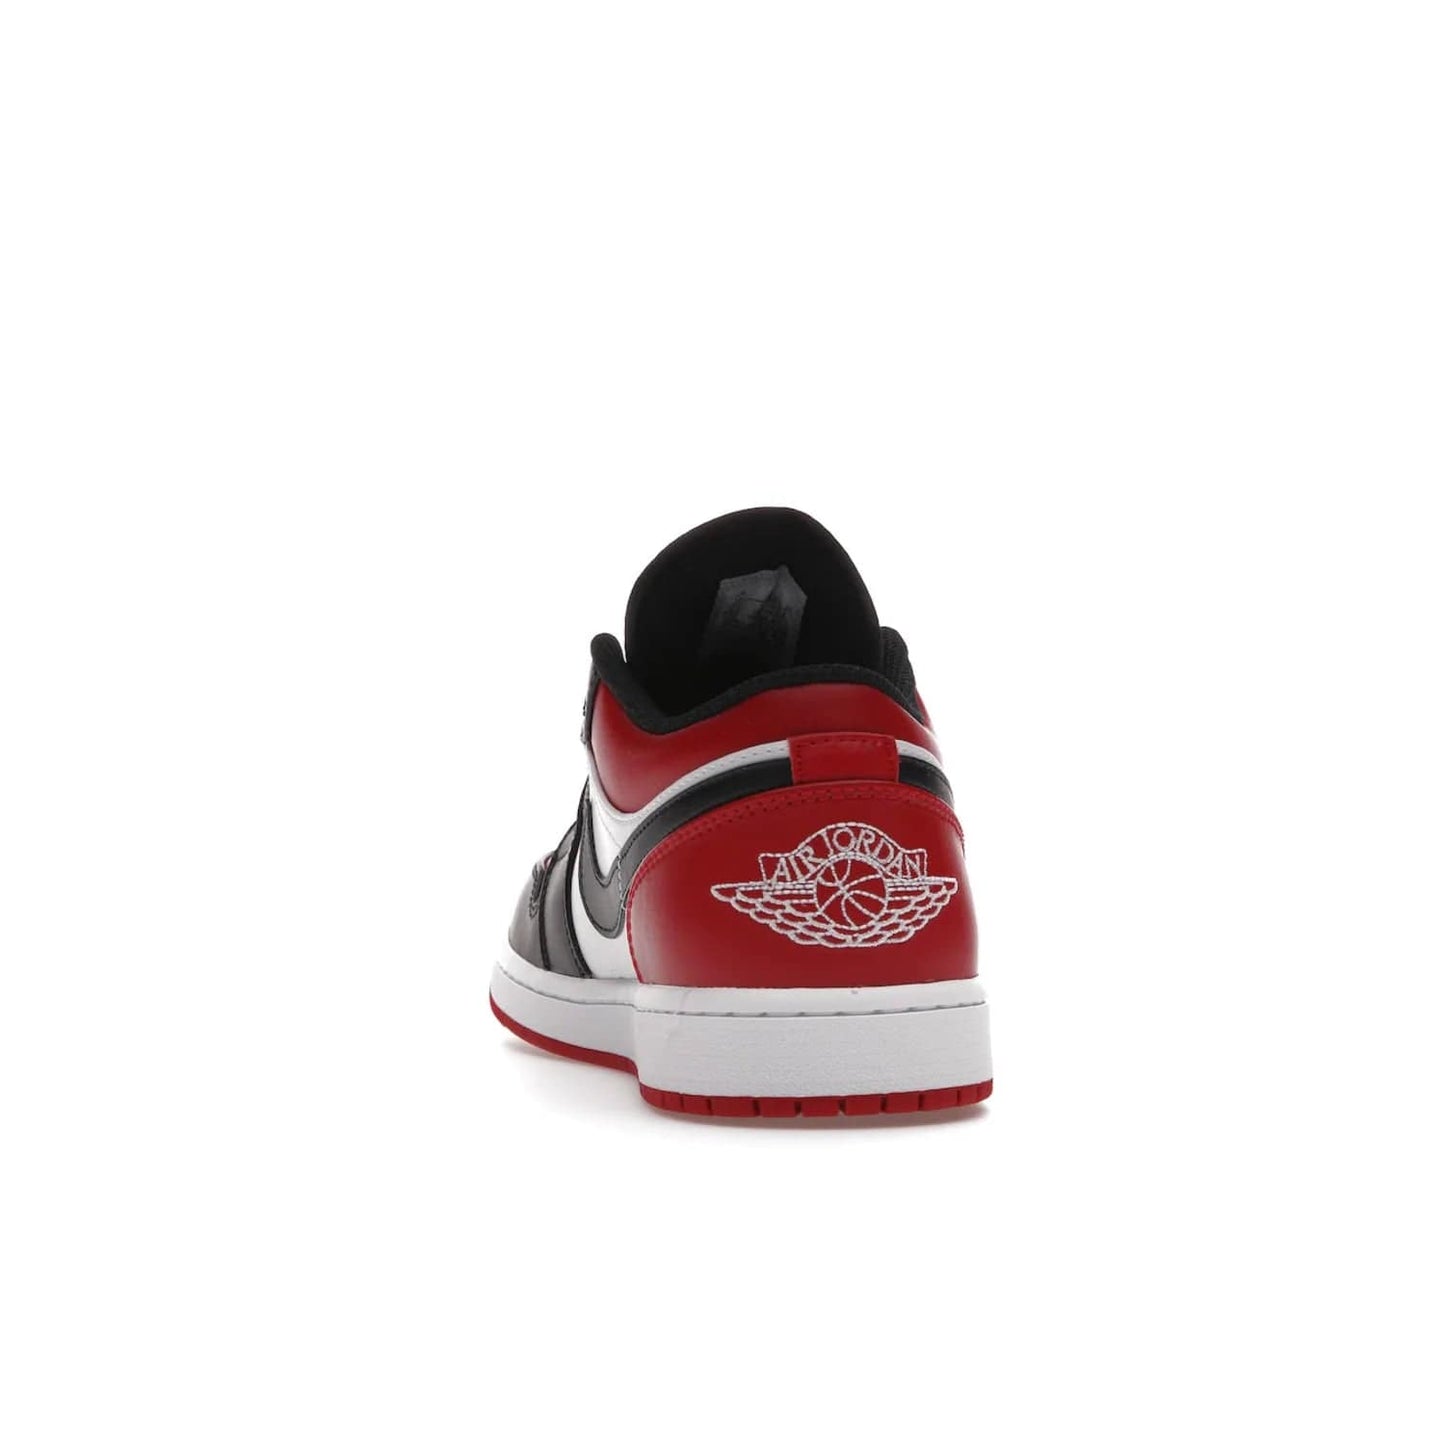 Jordan 1 Low Bred Toe - Image 27 - Only at www.BallersClubKickz.com - Step into the iconic Jordan 1 Retro. Mixing and matching of leather in red, black, and white makes for a unique colorway. Finished off with a Wing logo embroidery & Jumpman label. Comfortable and stylish at an affordable $100, the Jordan 1 Low Bred Toe is perfect for any true sneaker fan.